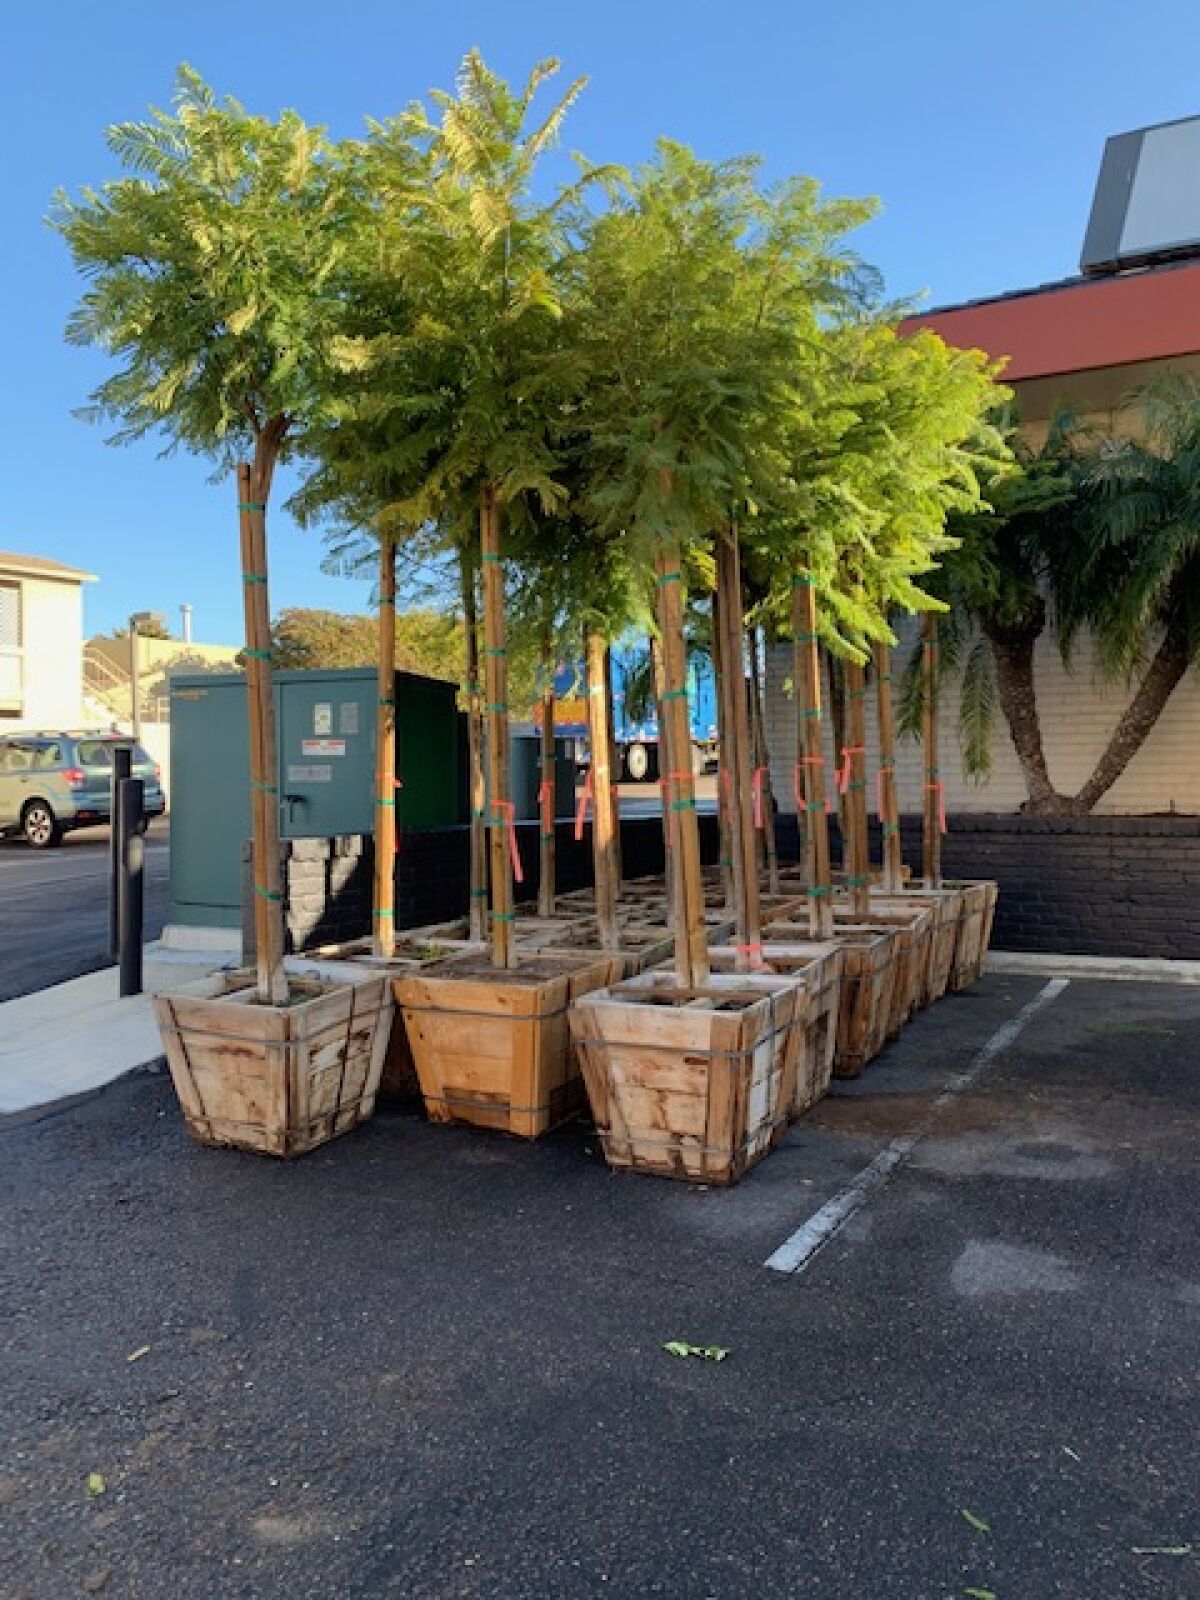 Donated jacaranda trees are pictured ready to be planted.